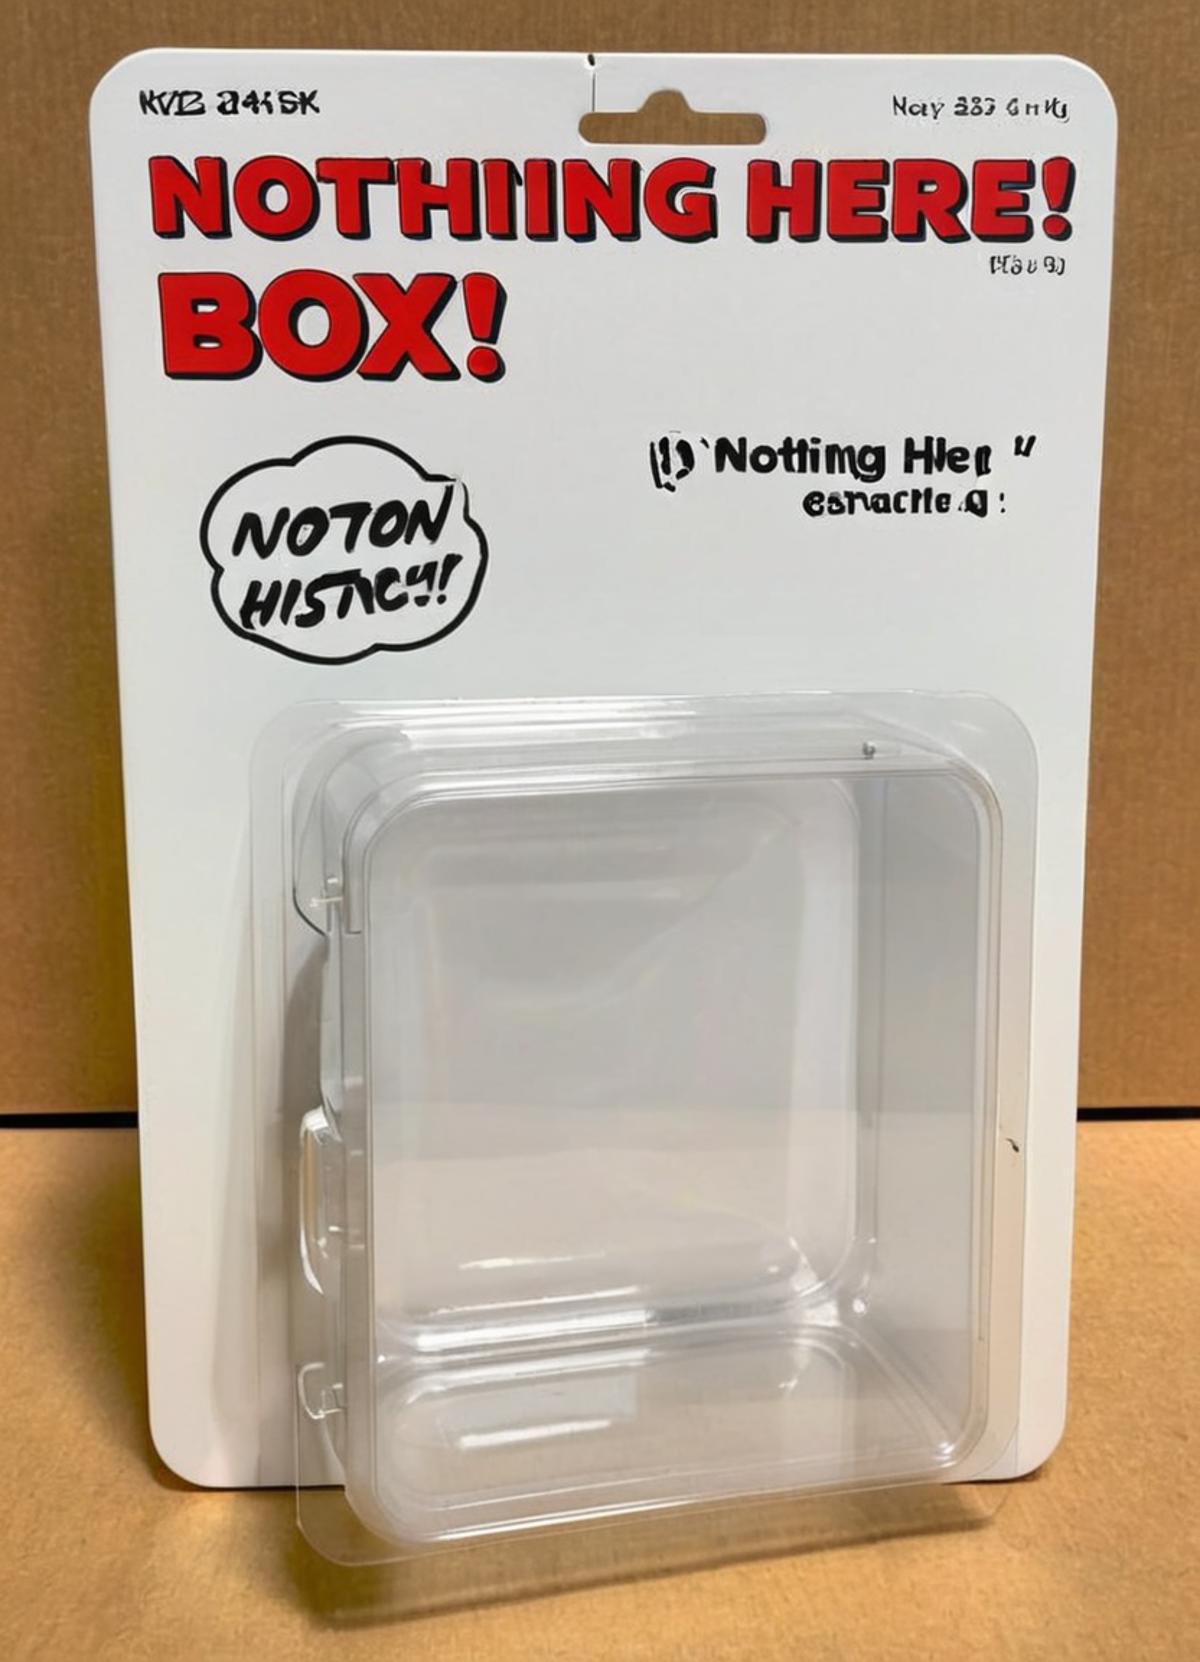 A small plastic container with a label that says "Noting her Box".